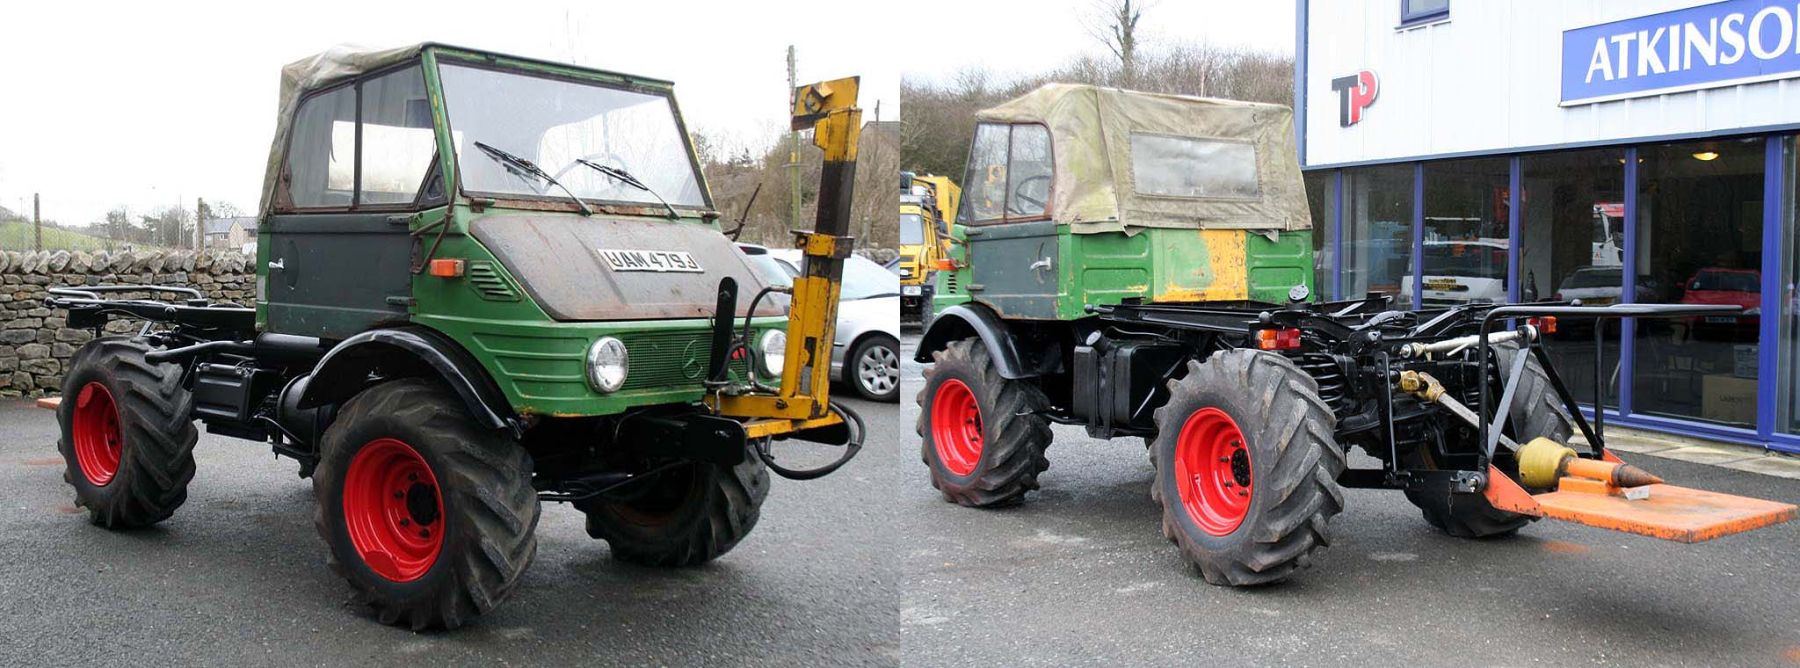 Restoration Project Sees Mog Brought Up to Working